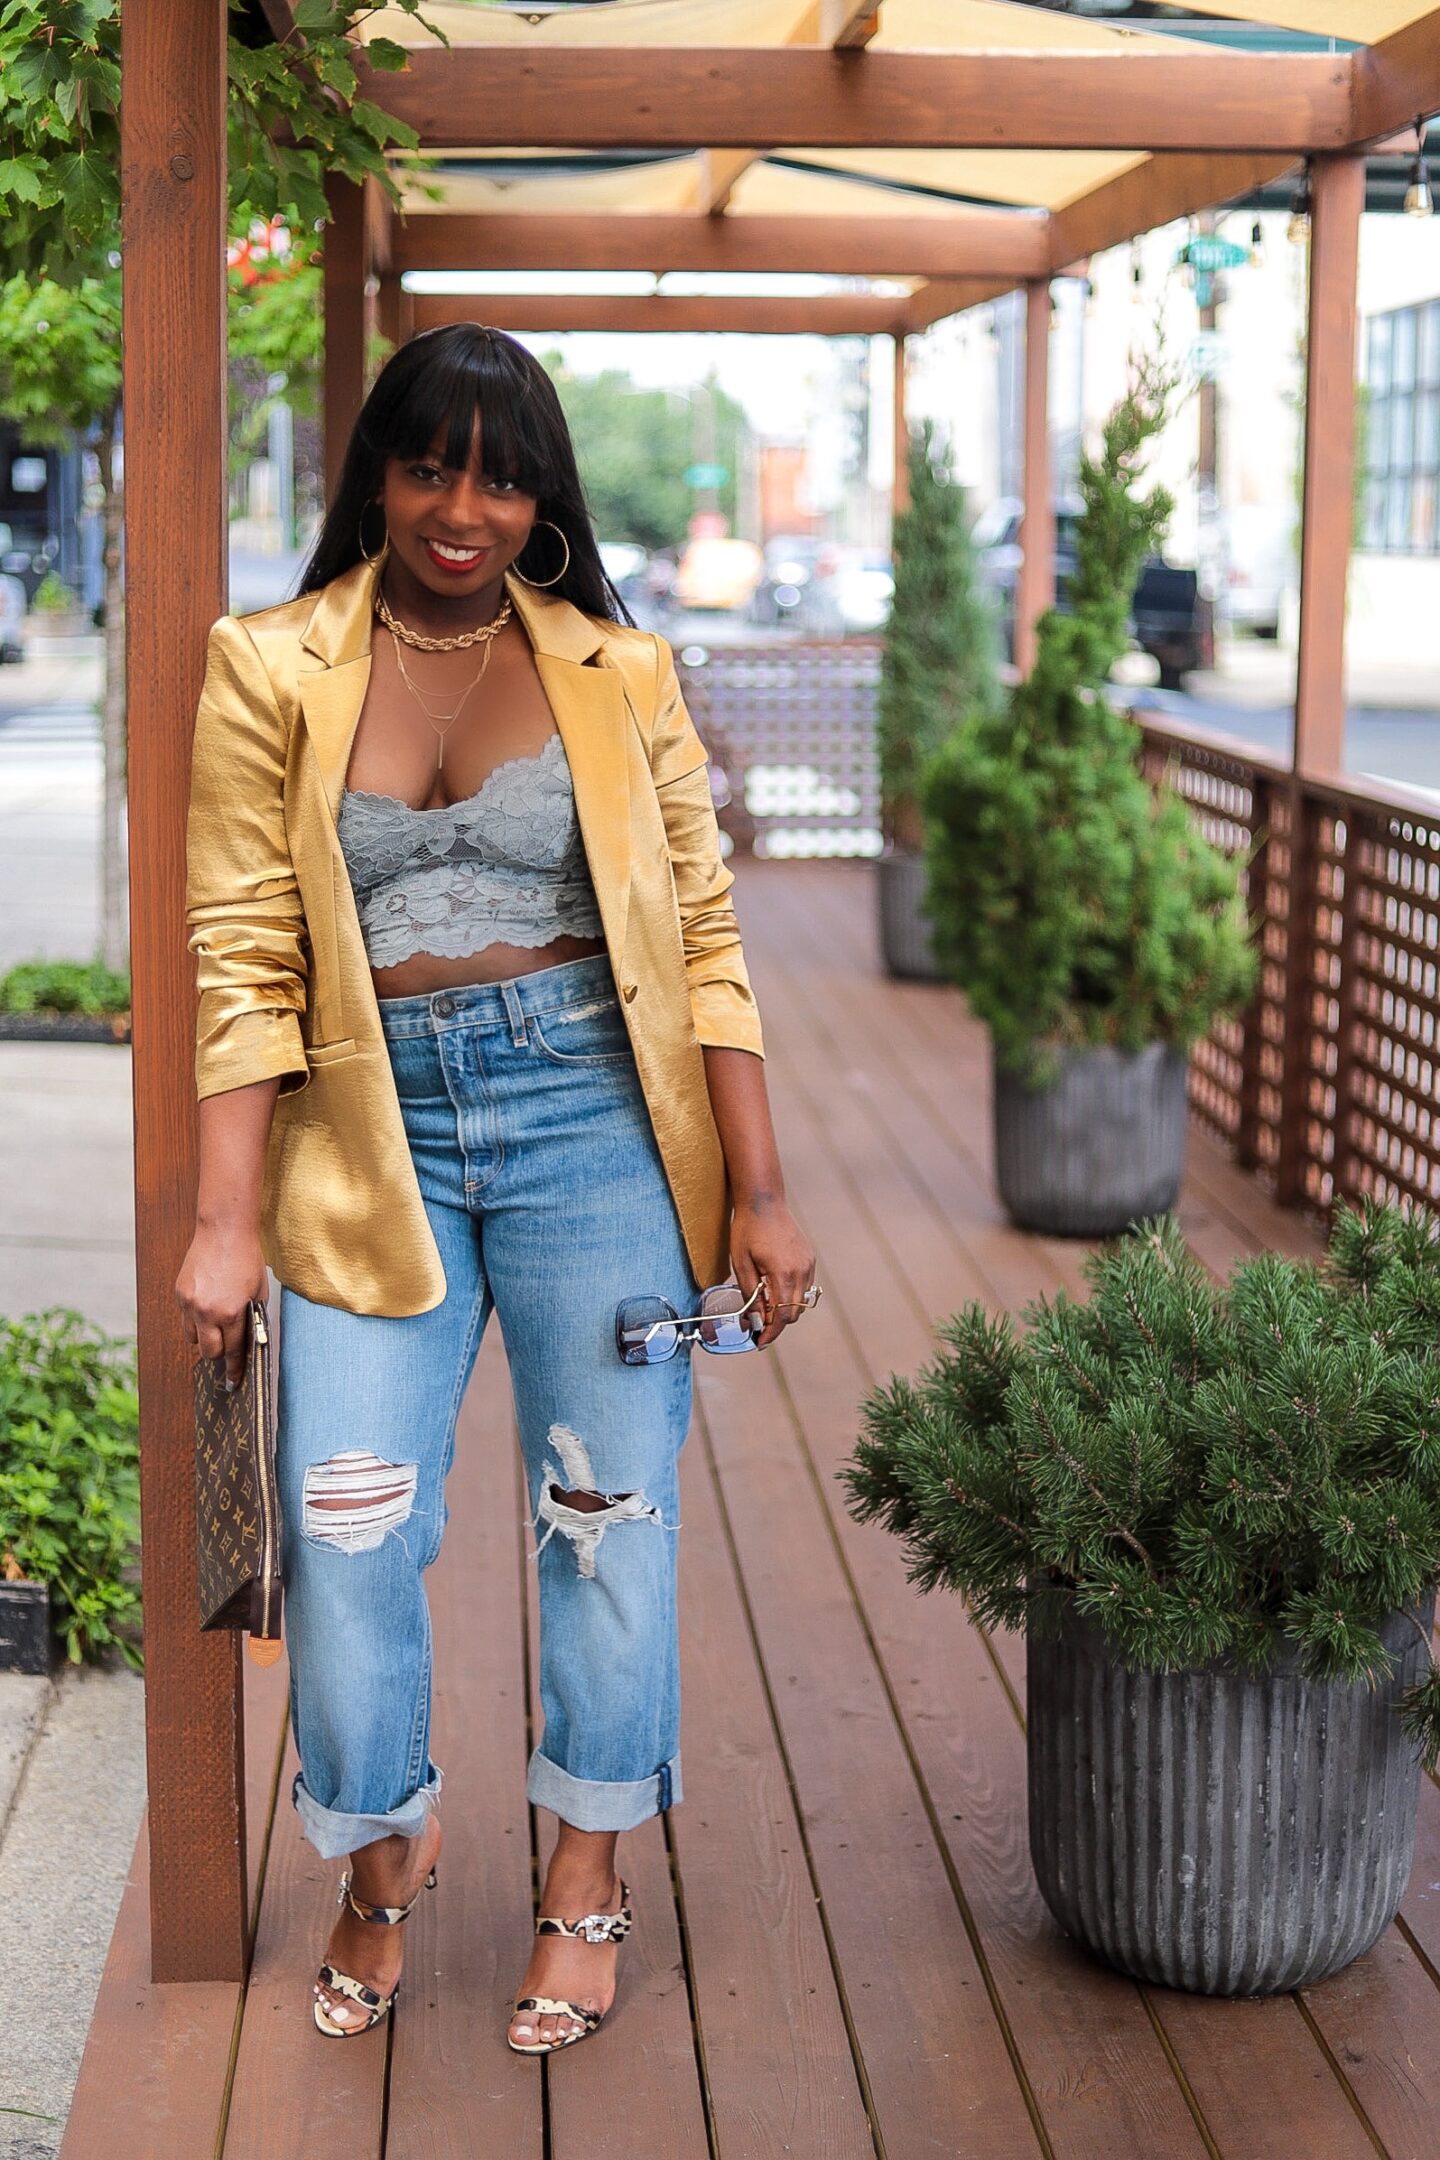 How to Wear The Bralette Trend for an Everyday Chic Look